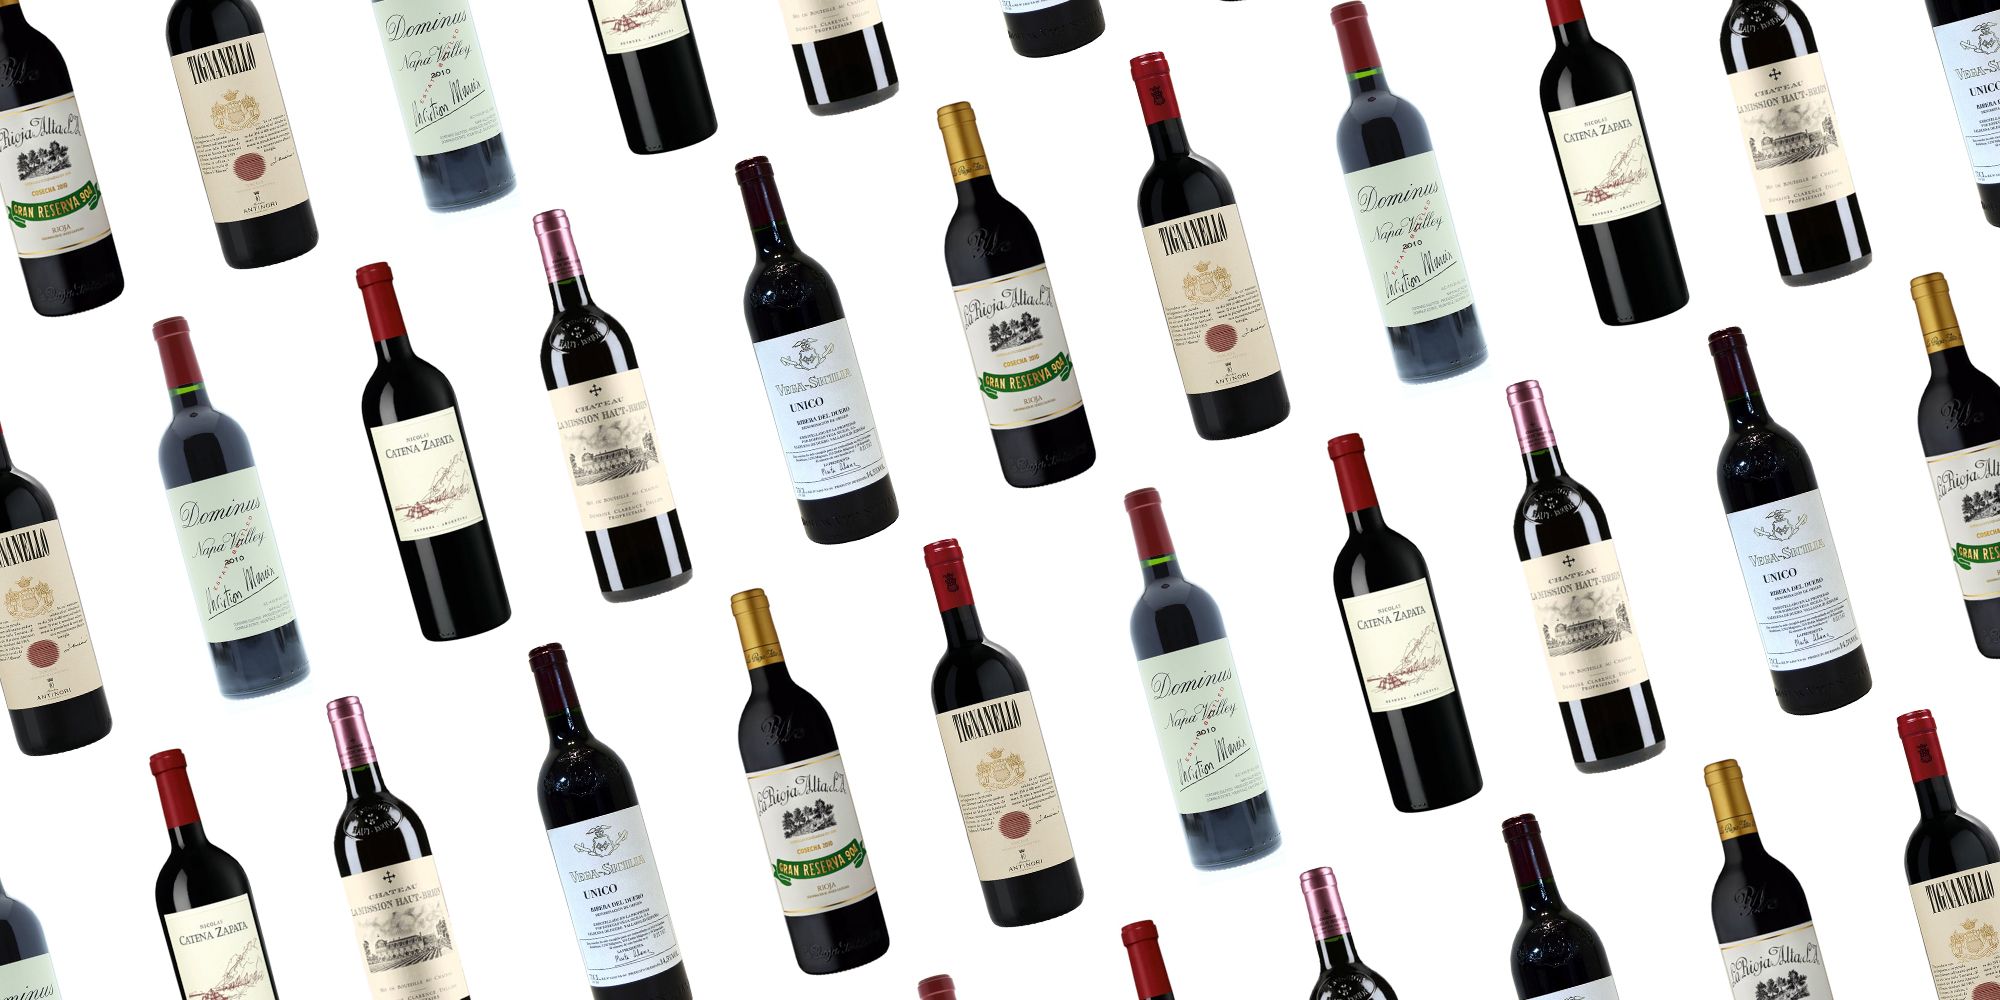 12 Best Red Wines To Drink 2023 - Top Red Wine Bottles To Try